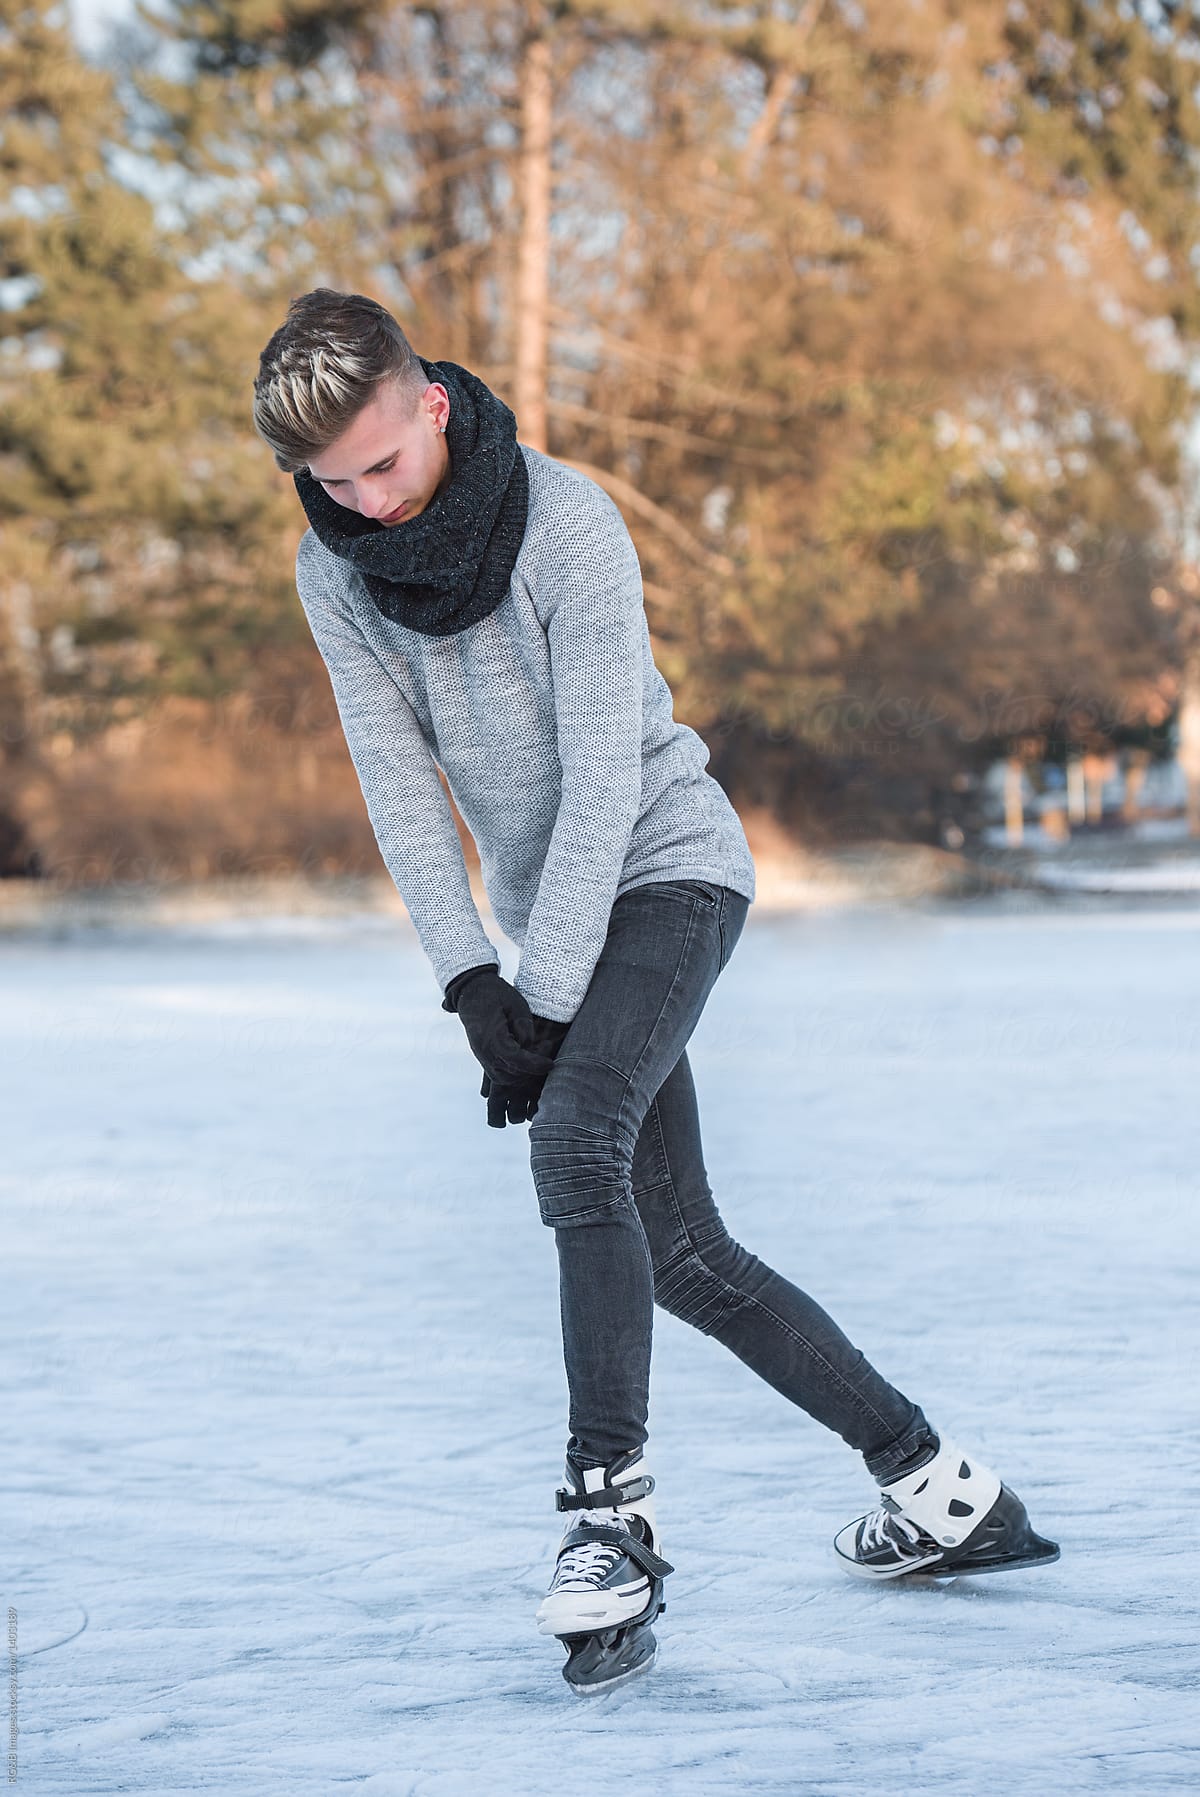 Teenager wearing black scarf and gloves ice skating outdoor